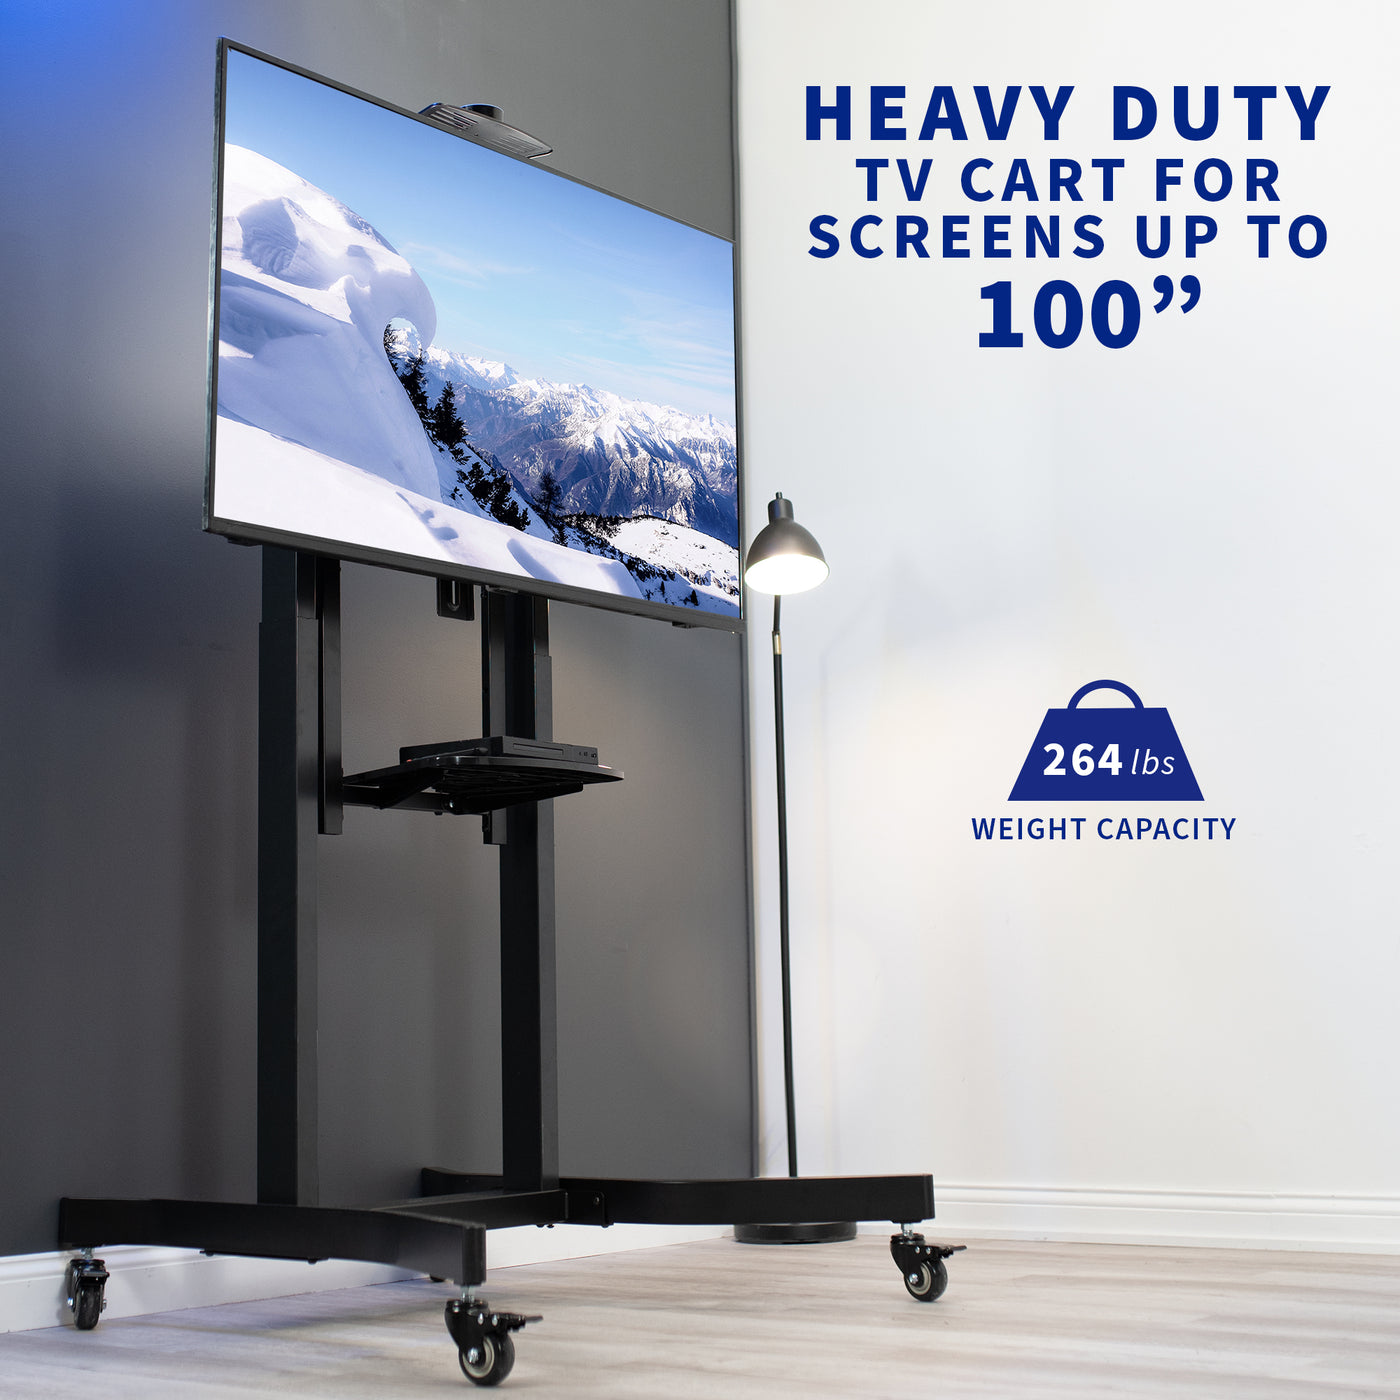 Heavy duty TV cart for up to 100-inch screens.